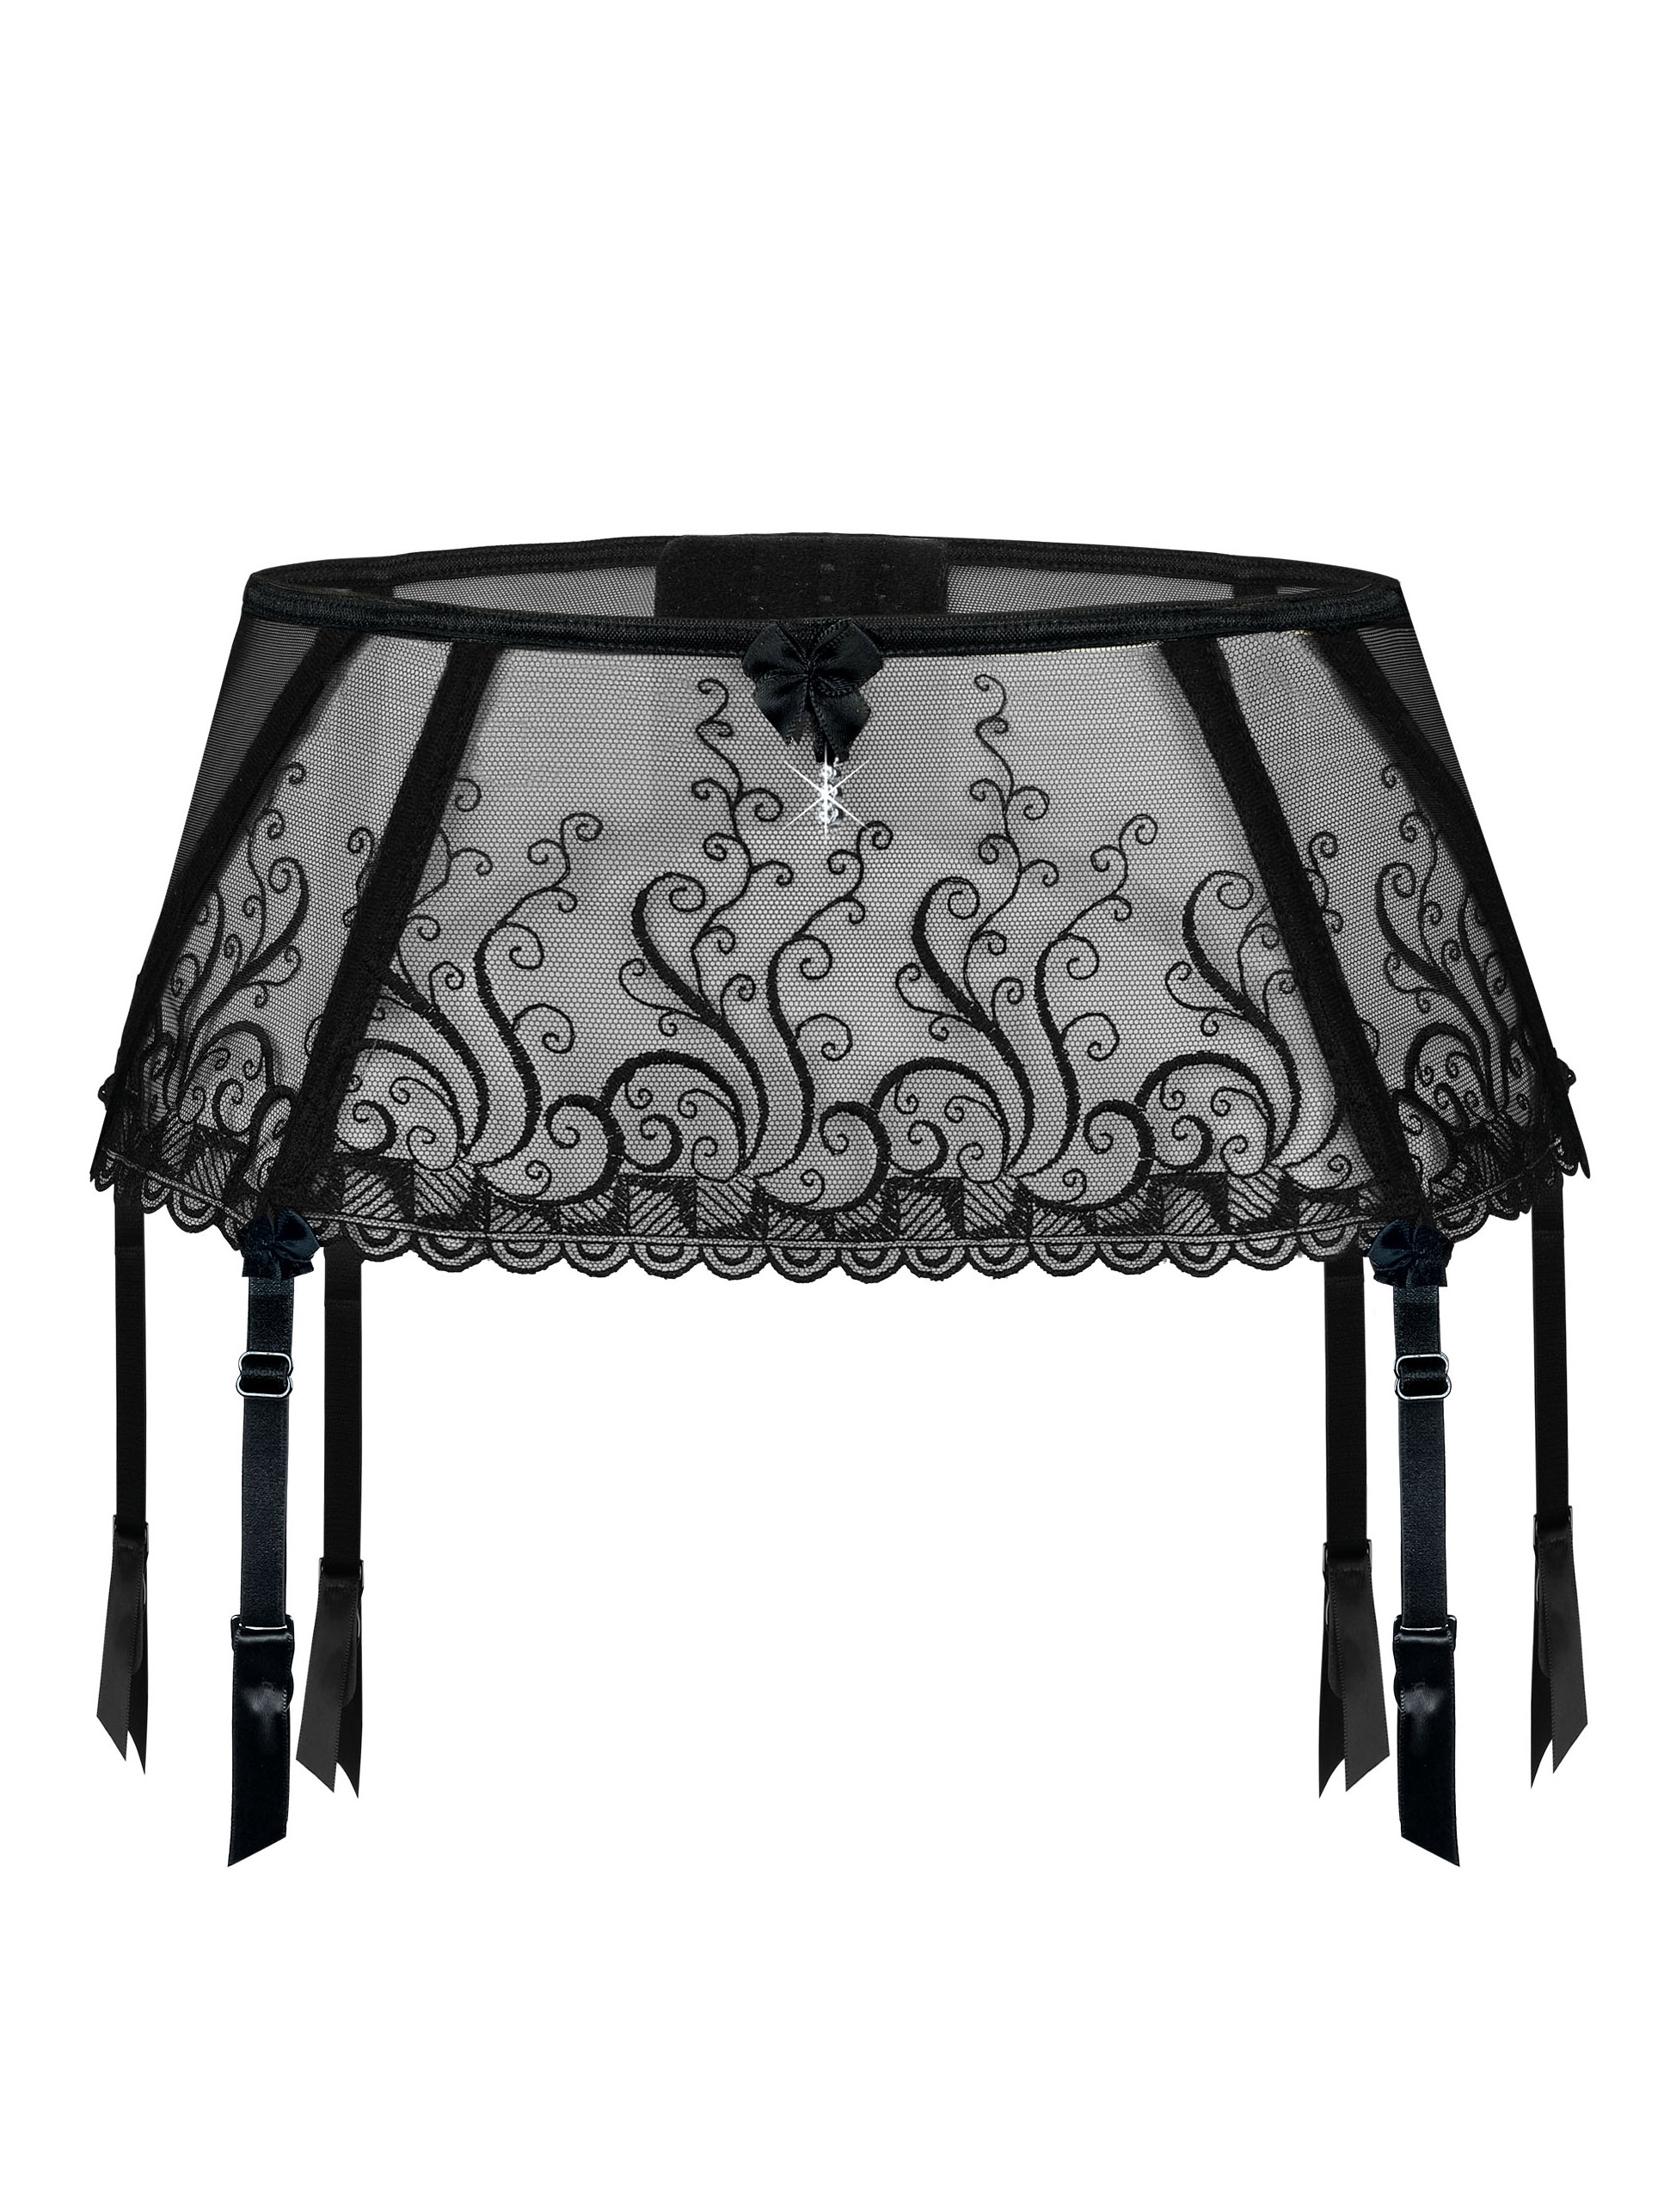 Lace garter belt with sheer tulle Roza Anuk #4